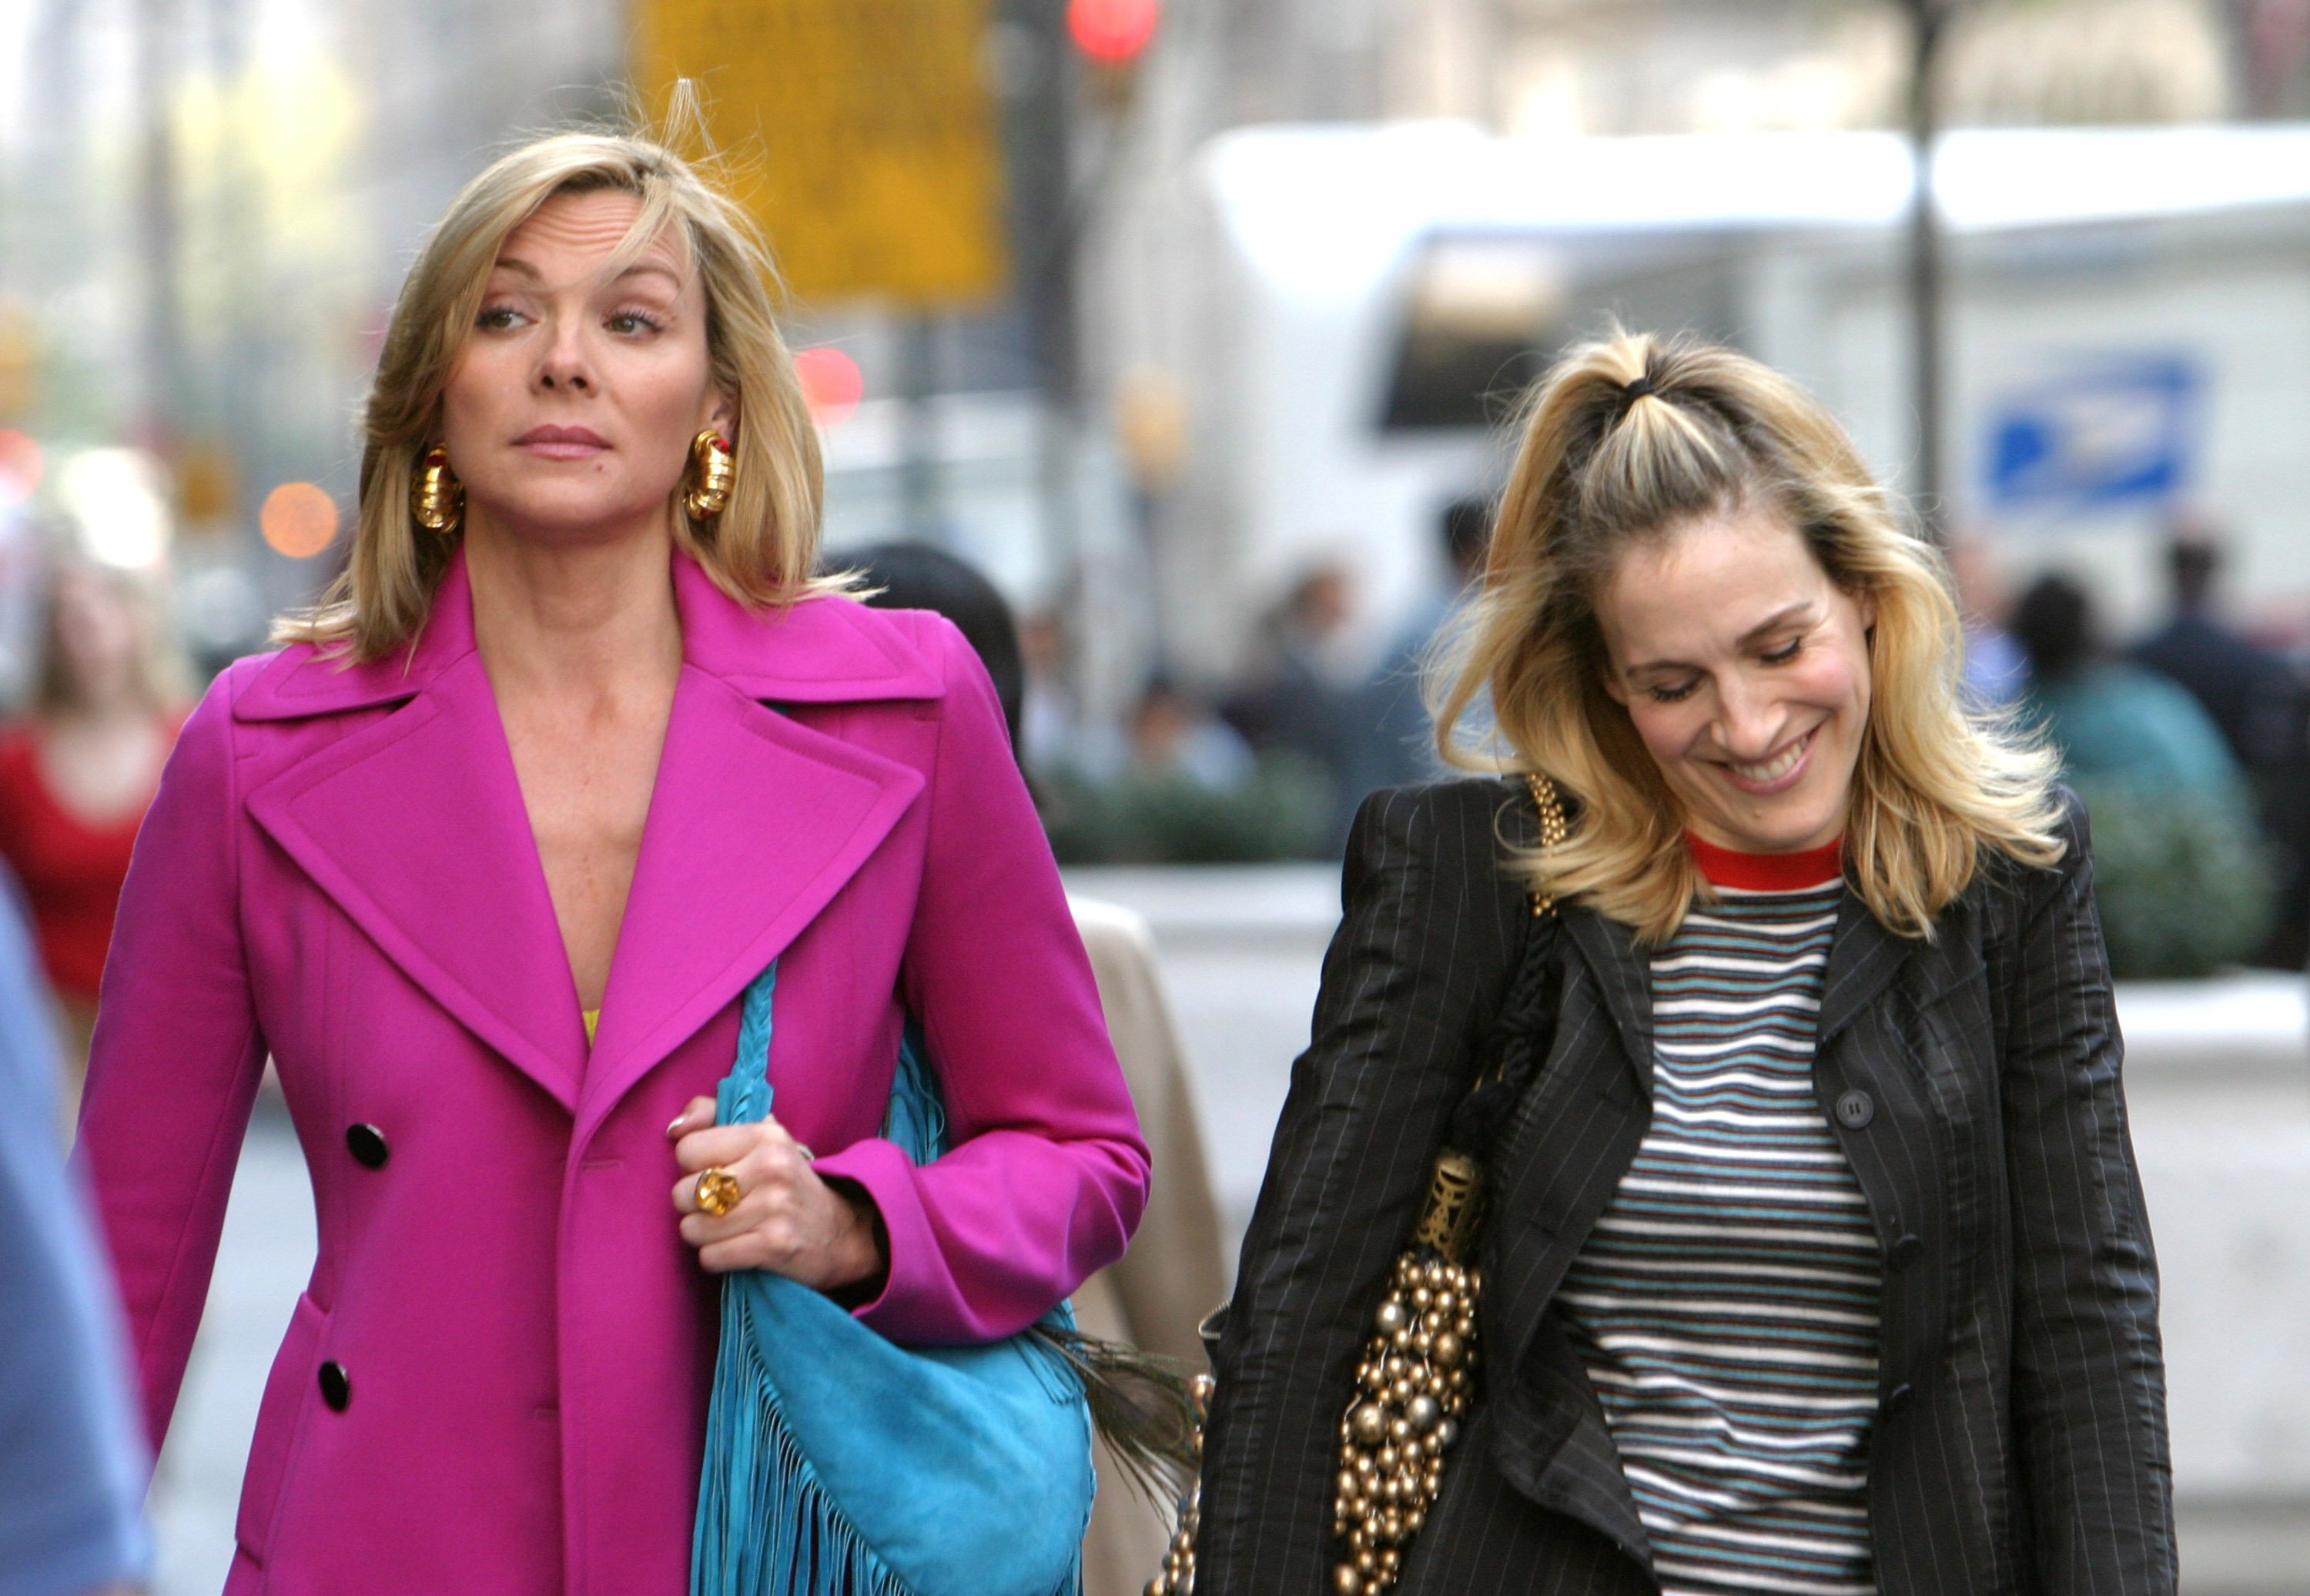 Kim Cattrall and Sarah Jessica Parker in New York City, 2003 | Source: Getty Images